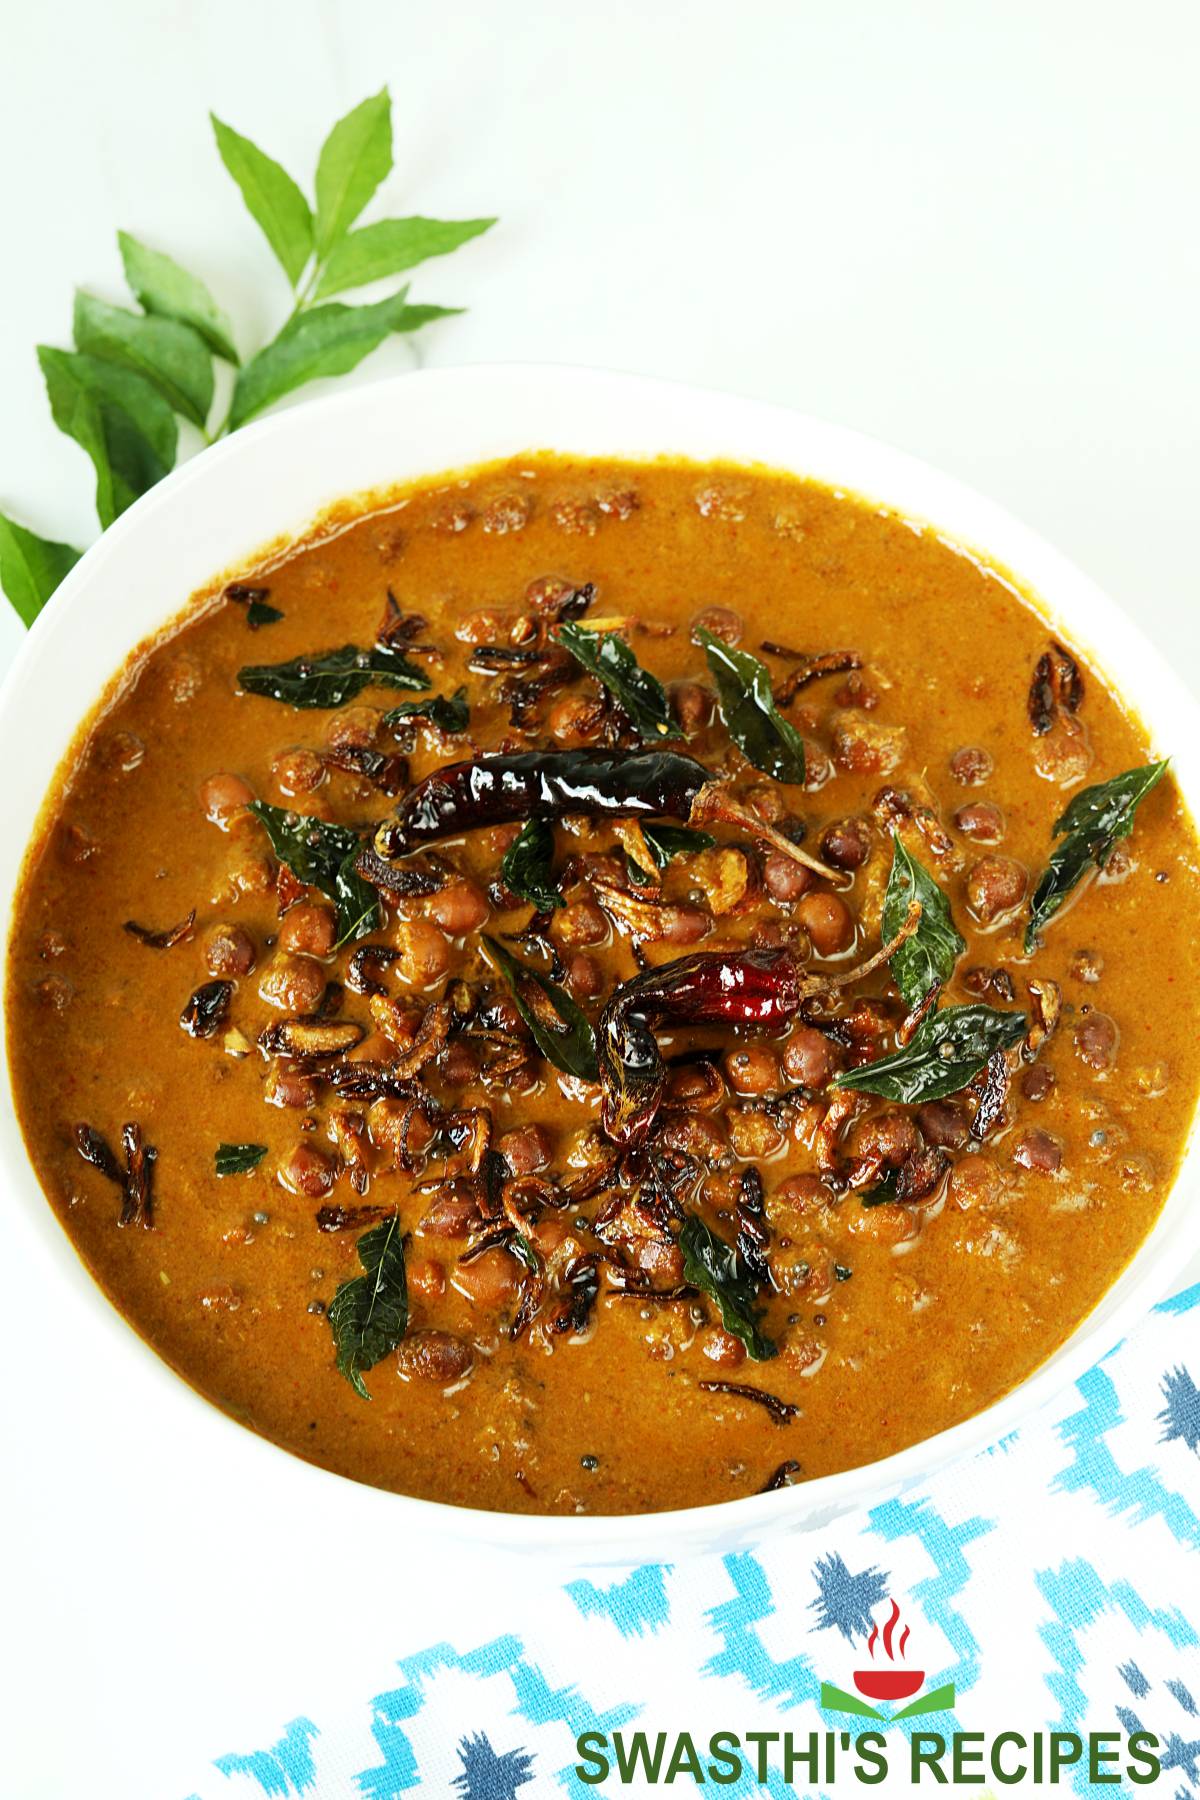 kadala curry made with coconut, black chickpeas, spices